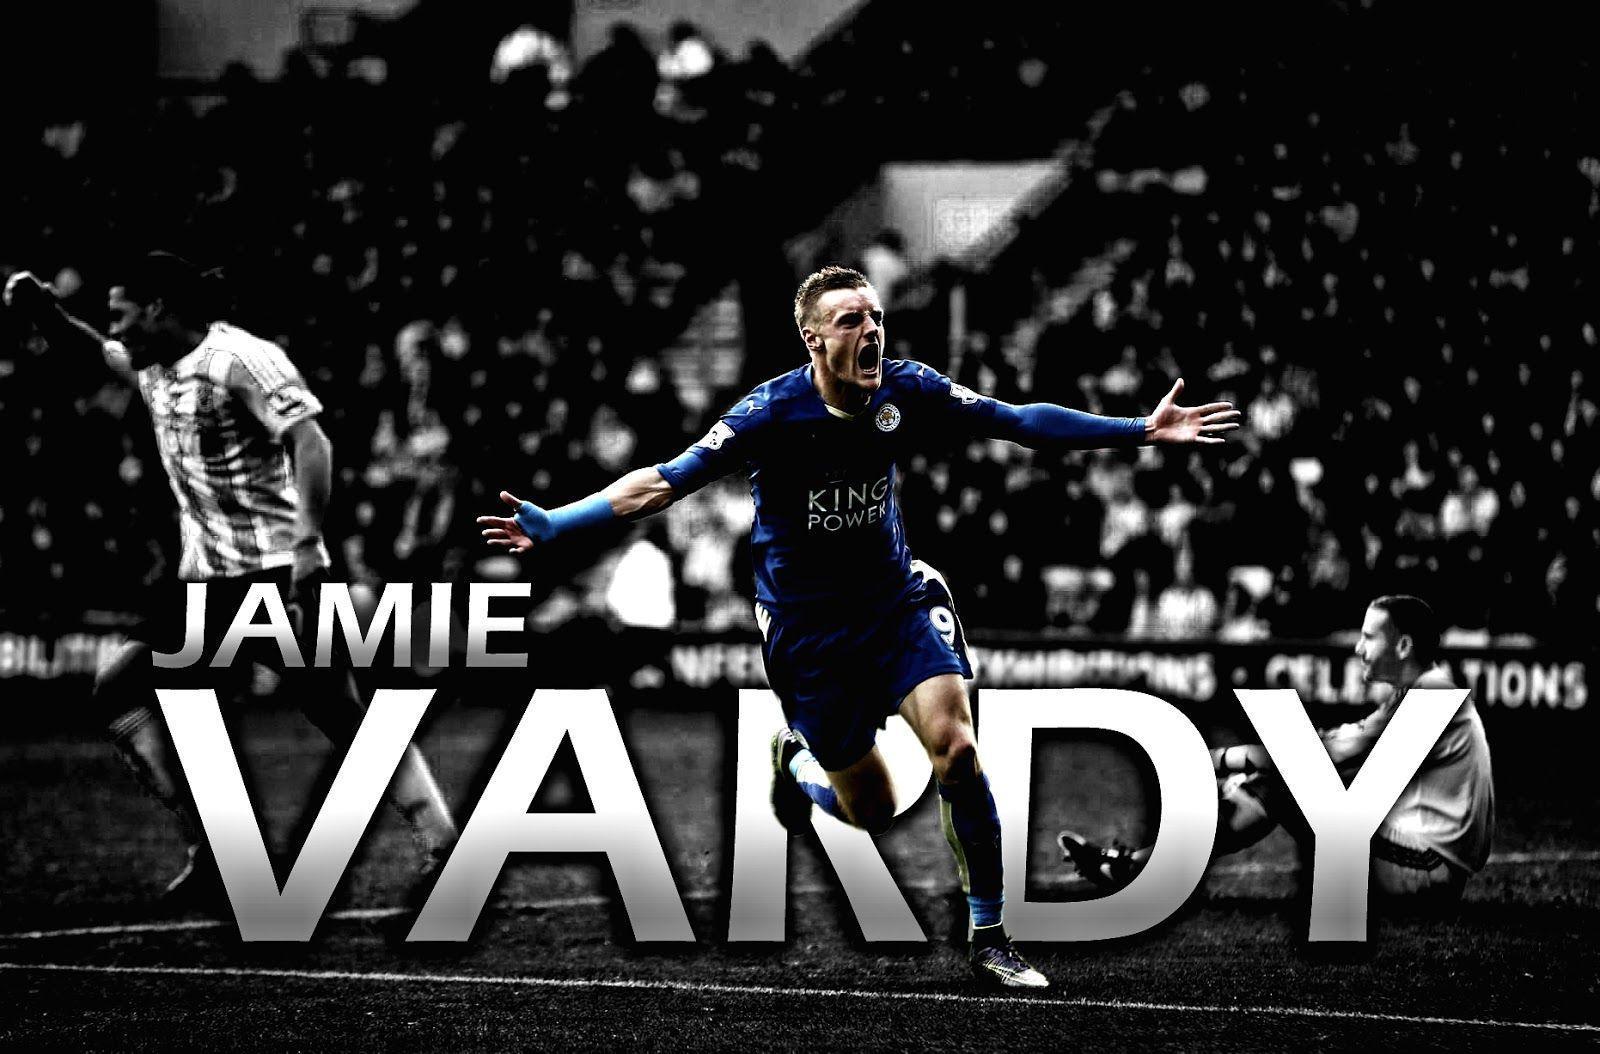 Jamie Vardy, The New Hero For Leicester City. Awesome Football